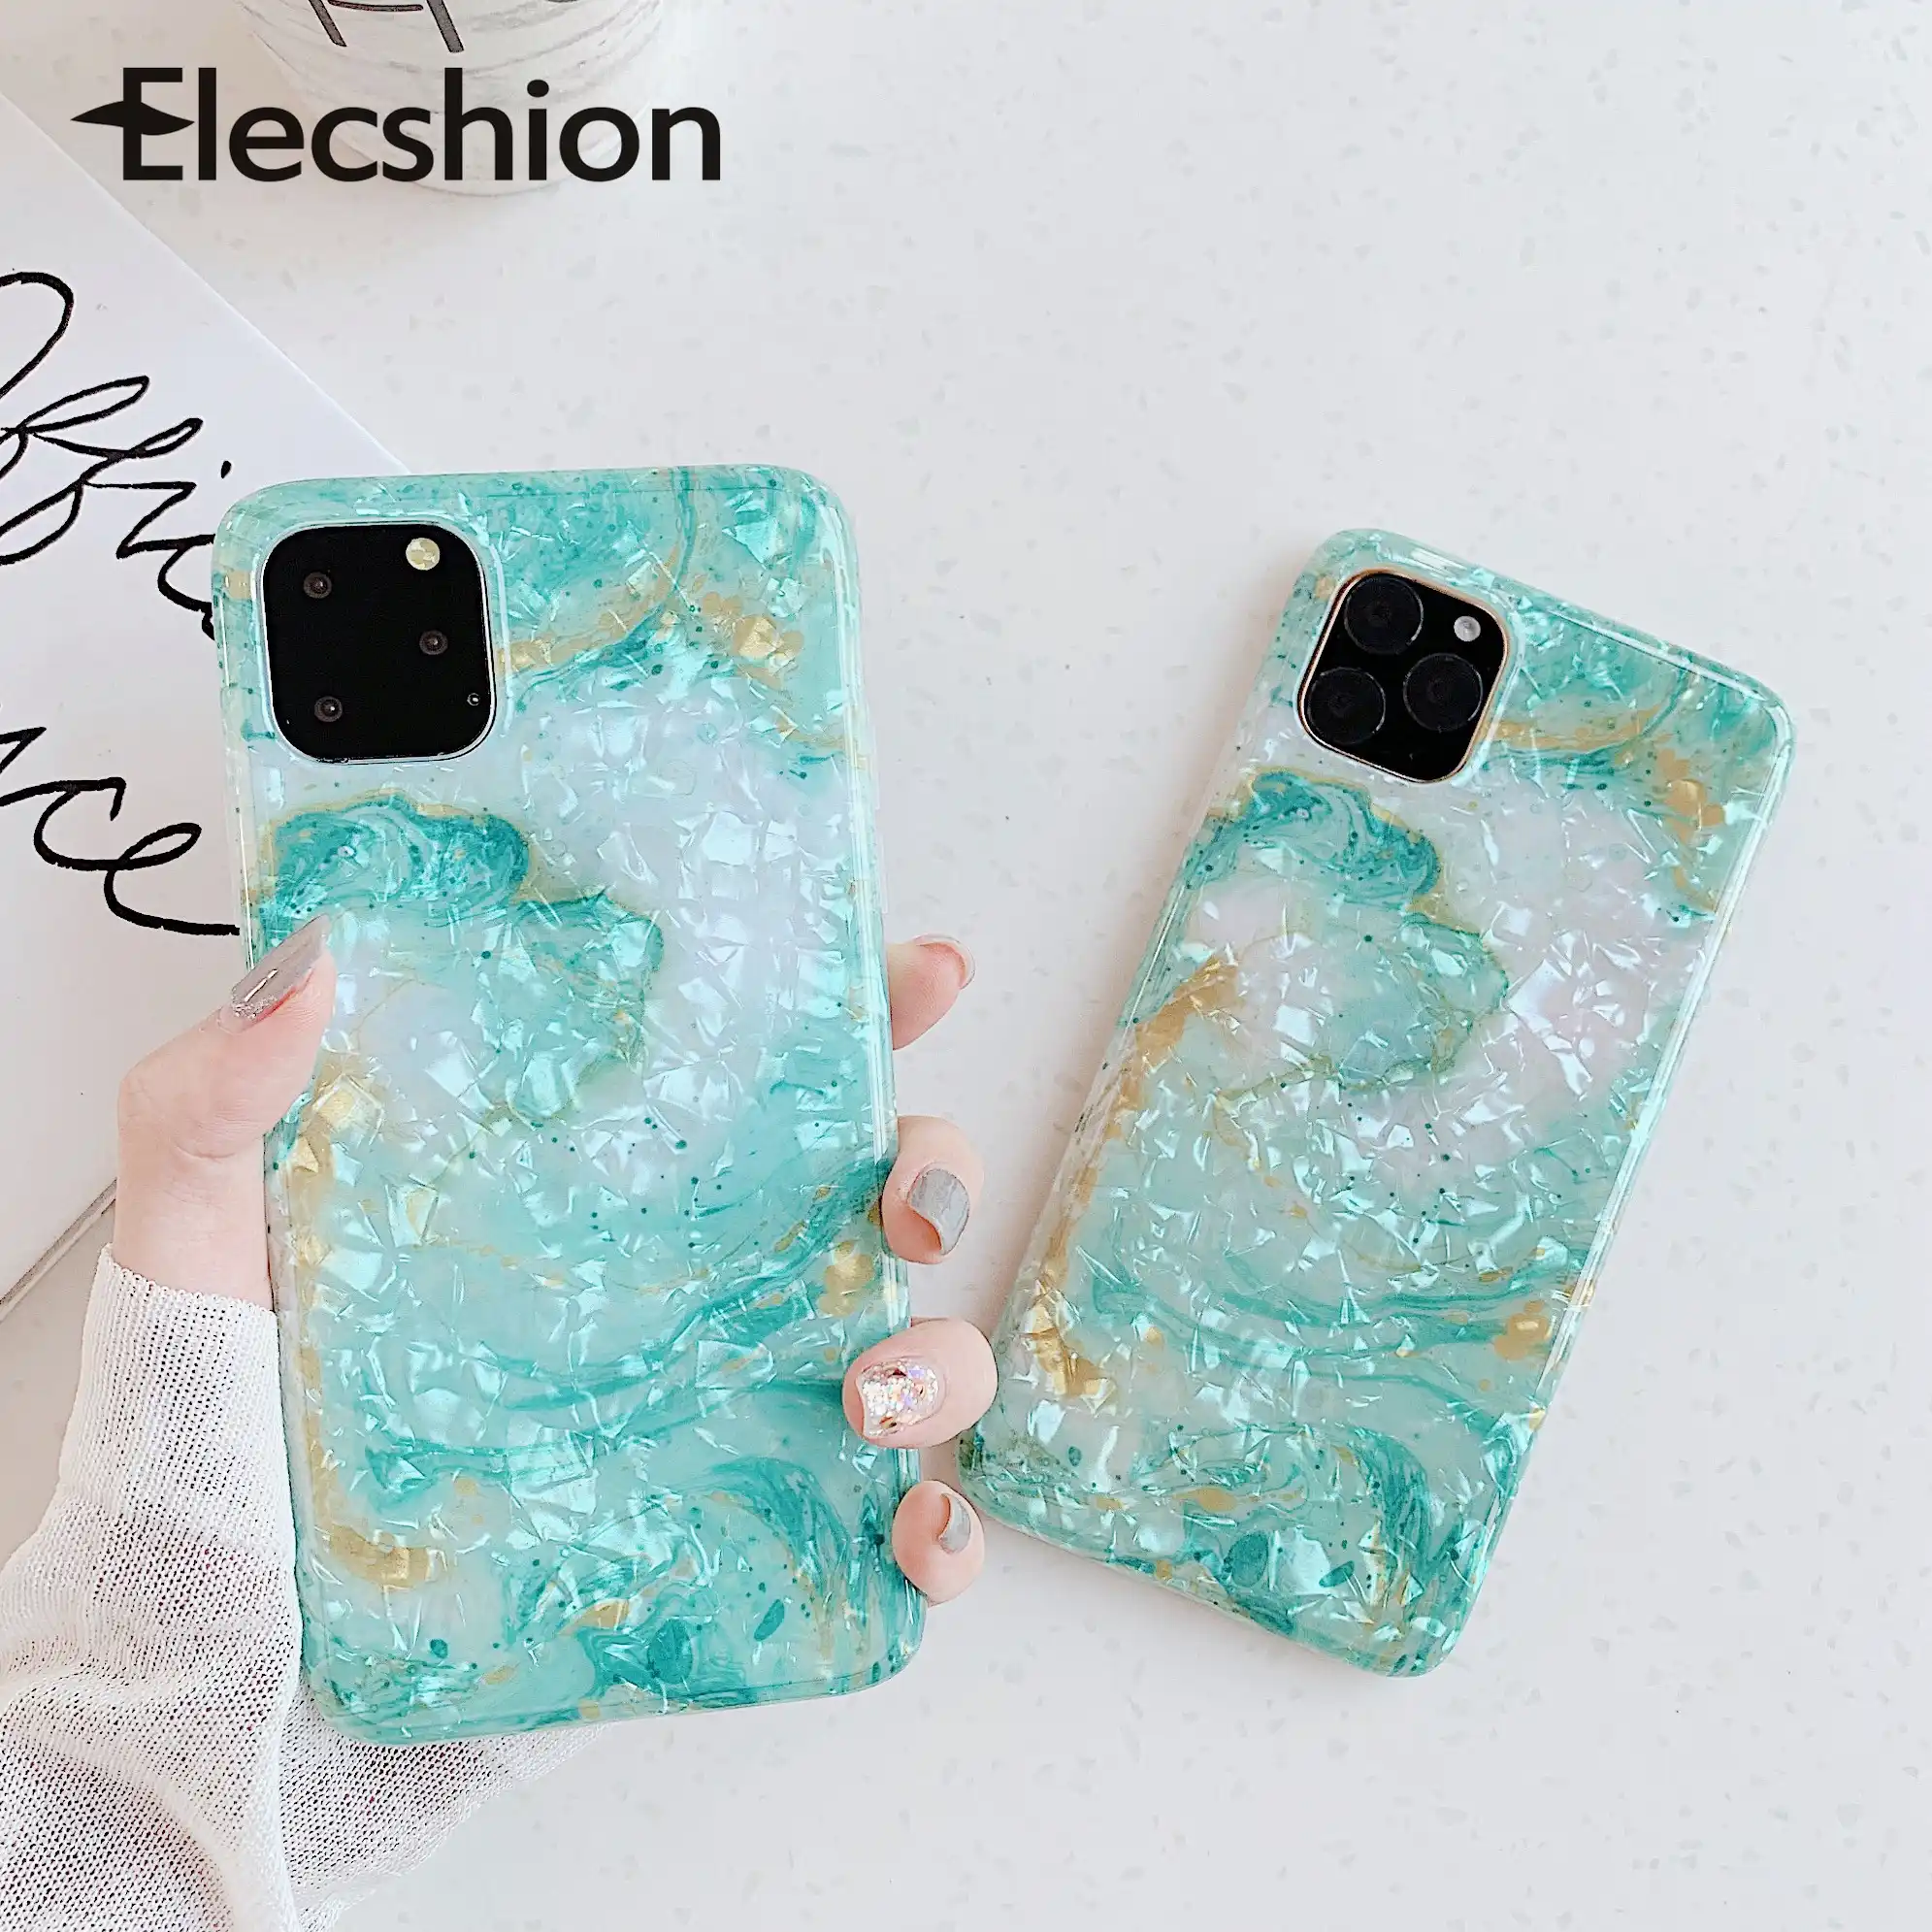 Glossy Case For Iphone 11 Pro Green Color Cover For Iphone 11 5 8 6 1 6 5 Inch Luxury Cute Marble Case Shell For Iphone 11 Capa Waterproof Cases Aliexpress